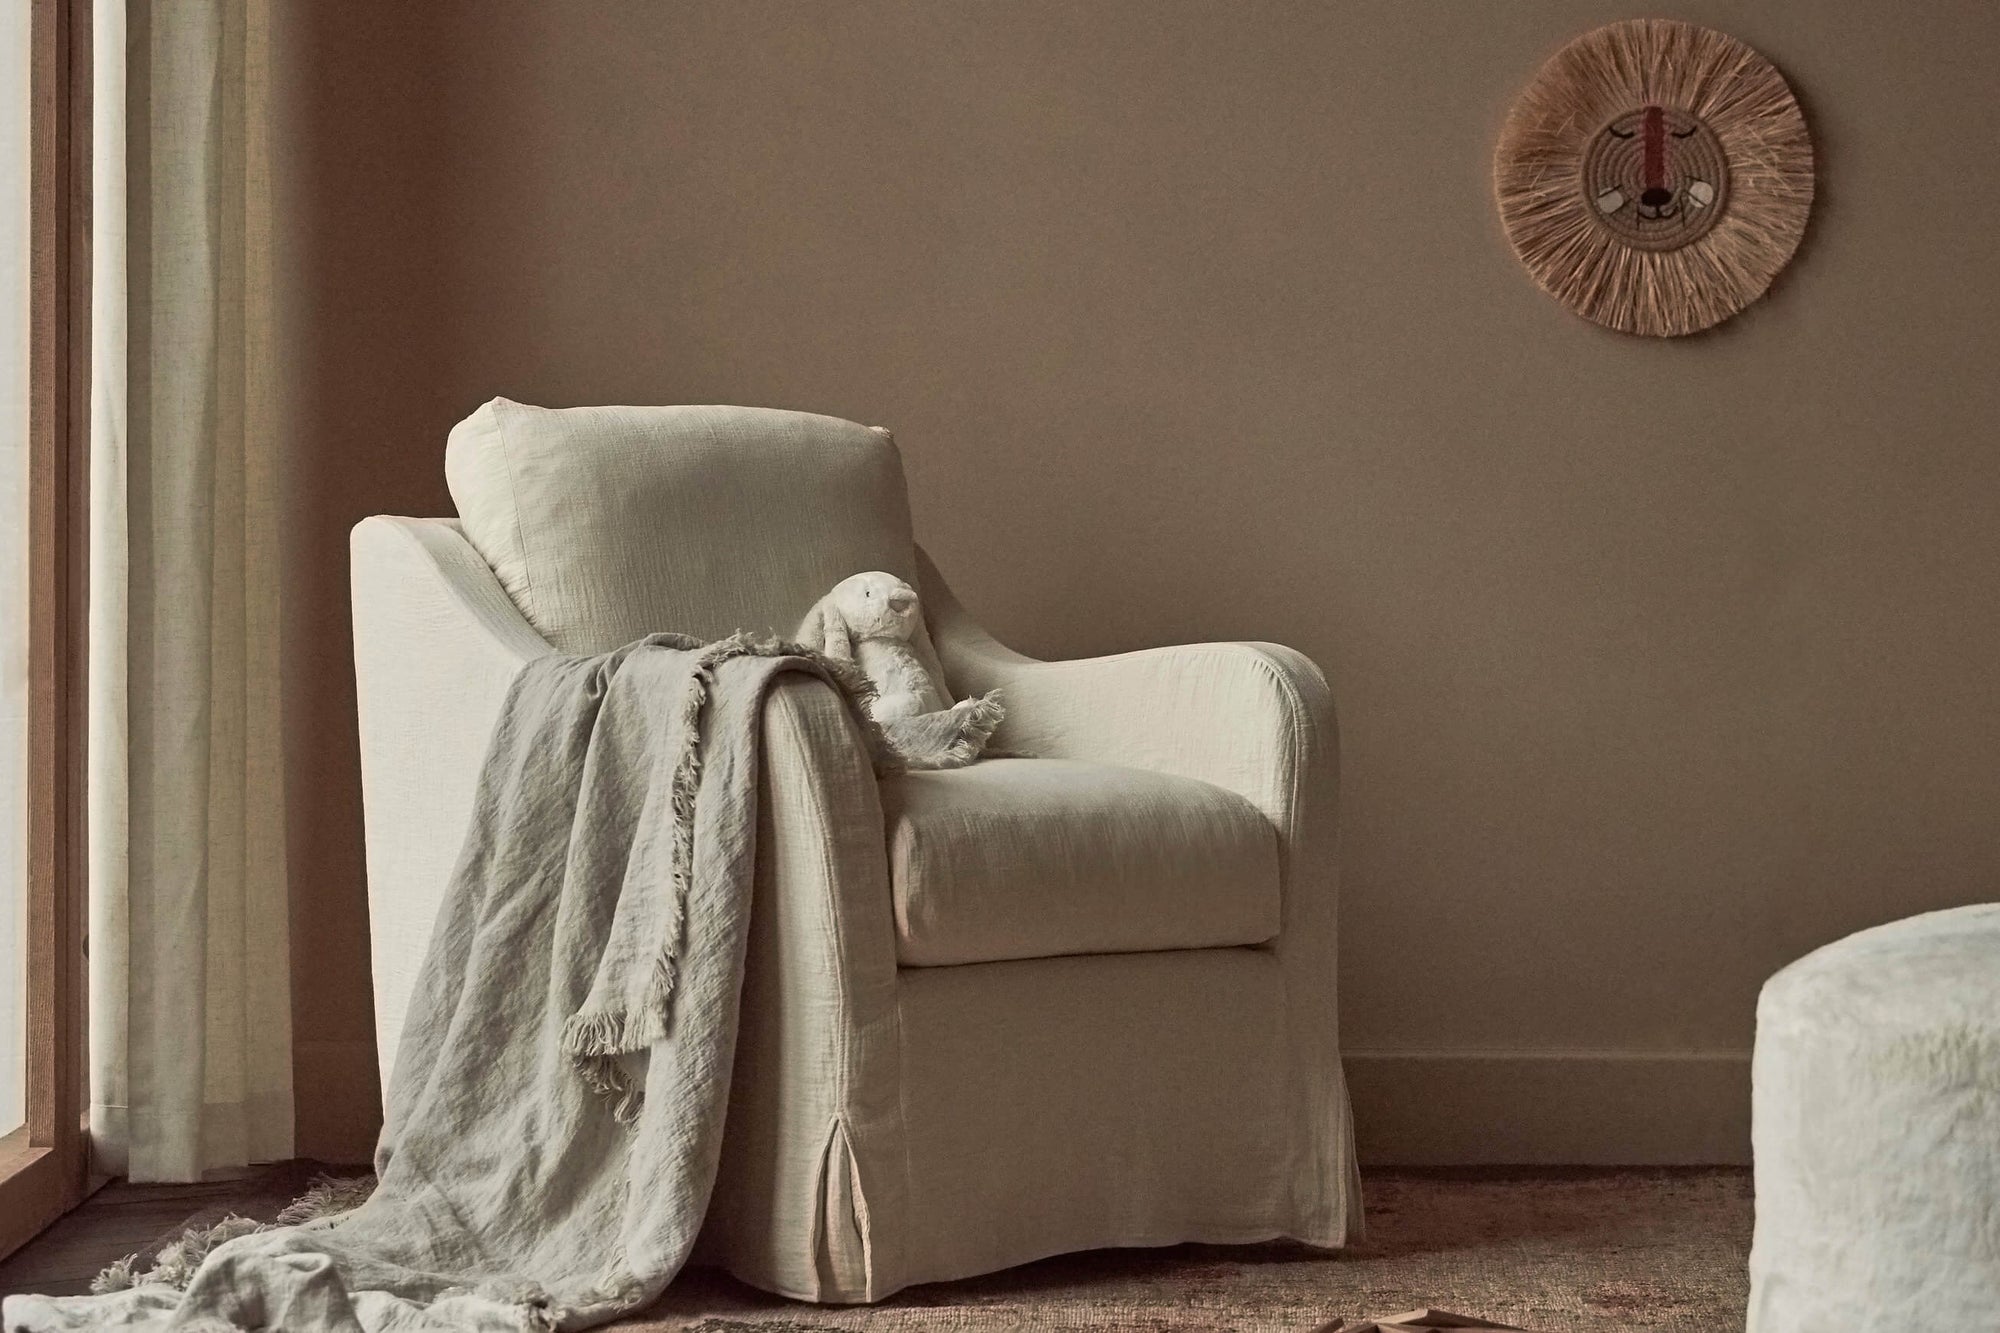 Esme Glider Chair in Corn Silk, a light beige Washed Cotton Linen, in a sunlit room by a window with a blanket and stuffed toy placed on the seat